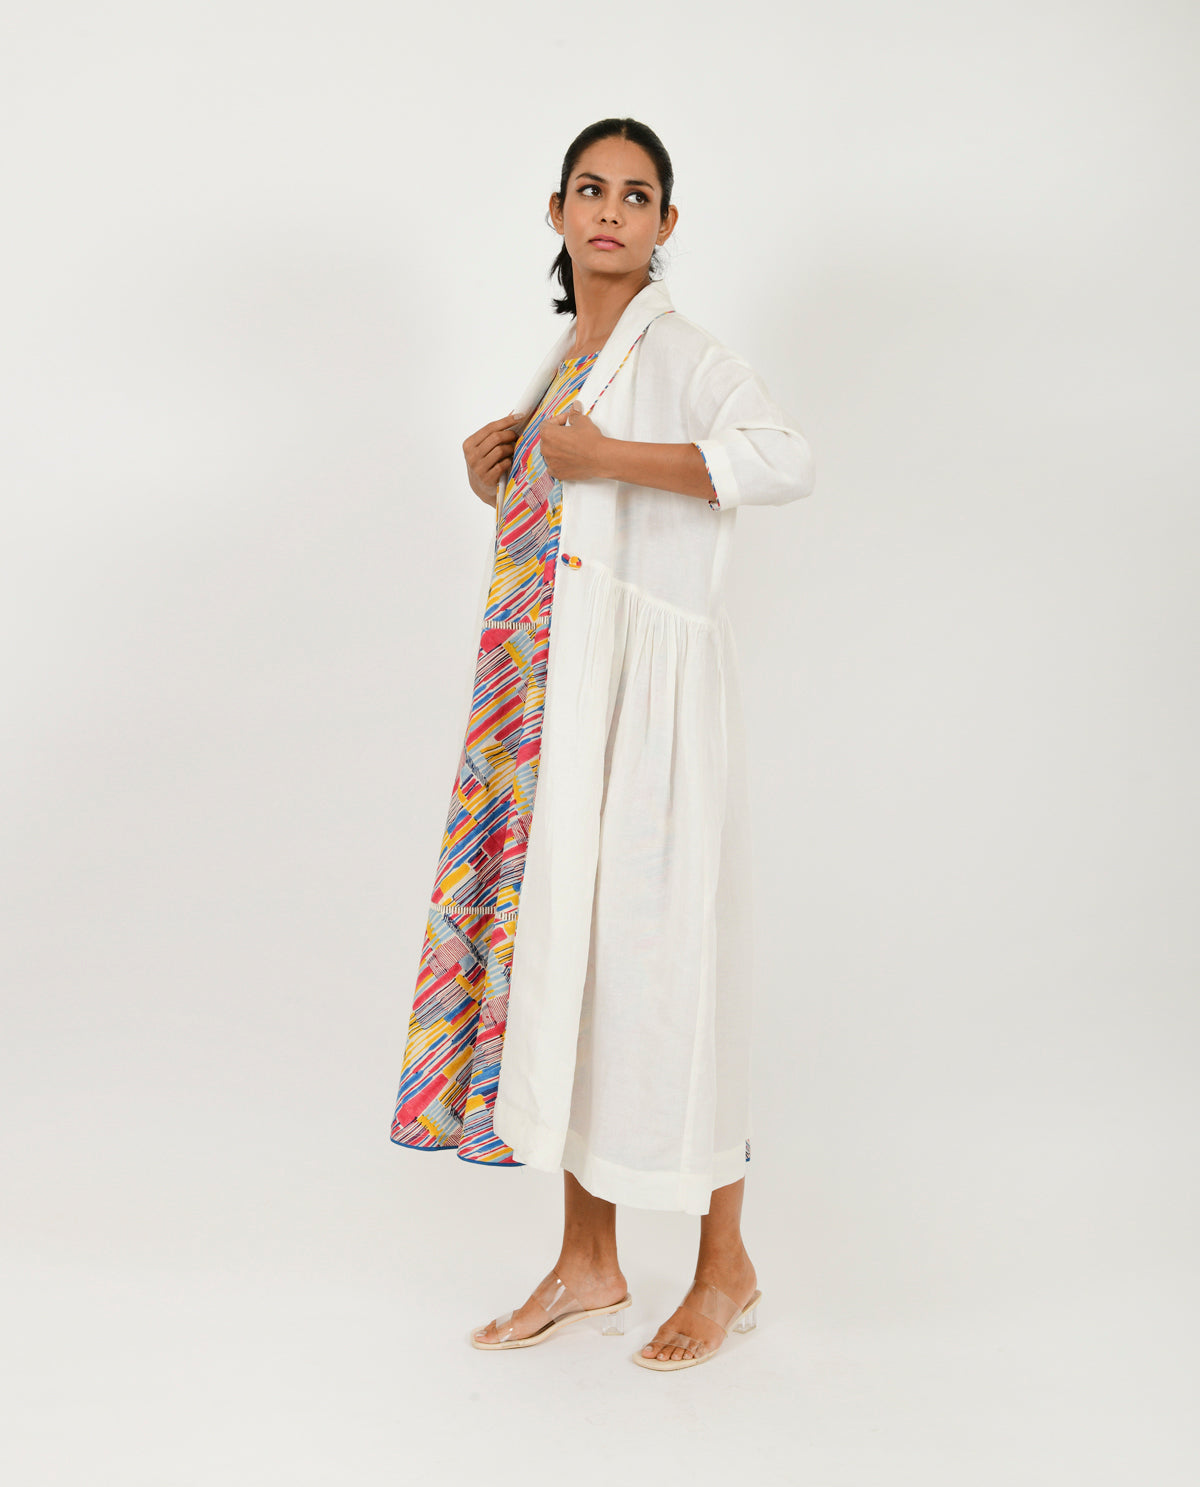 Off-White Linen Jacket at Kamakhyaa by Rias Jaipur. This item is Casual Wear, Jackets, Linen Blend, Natural, Relaxed Fit, Solids, White, Womenswear, Yaadein